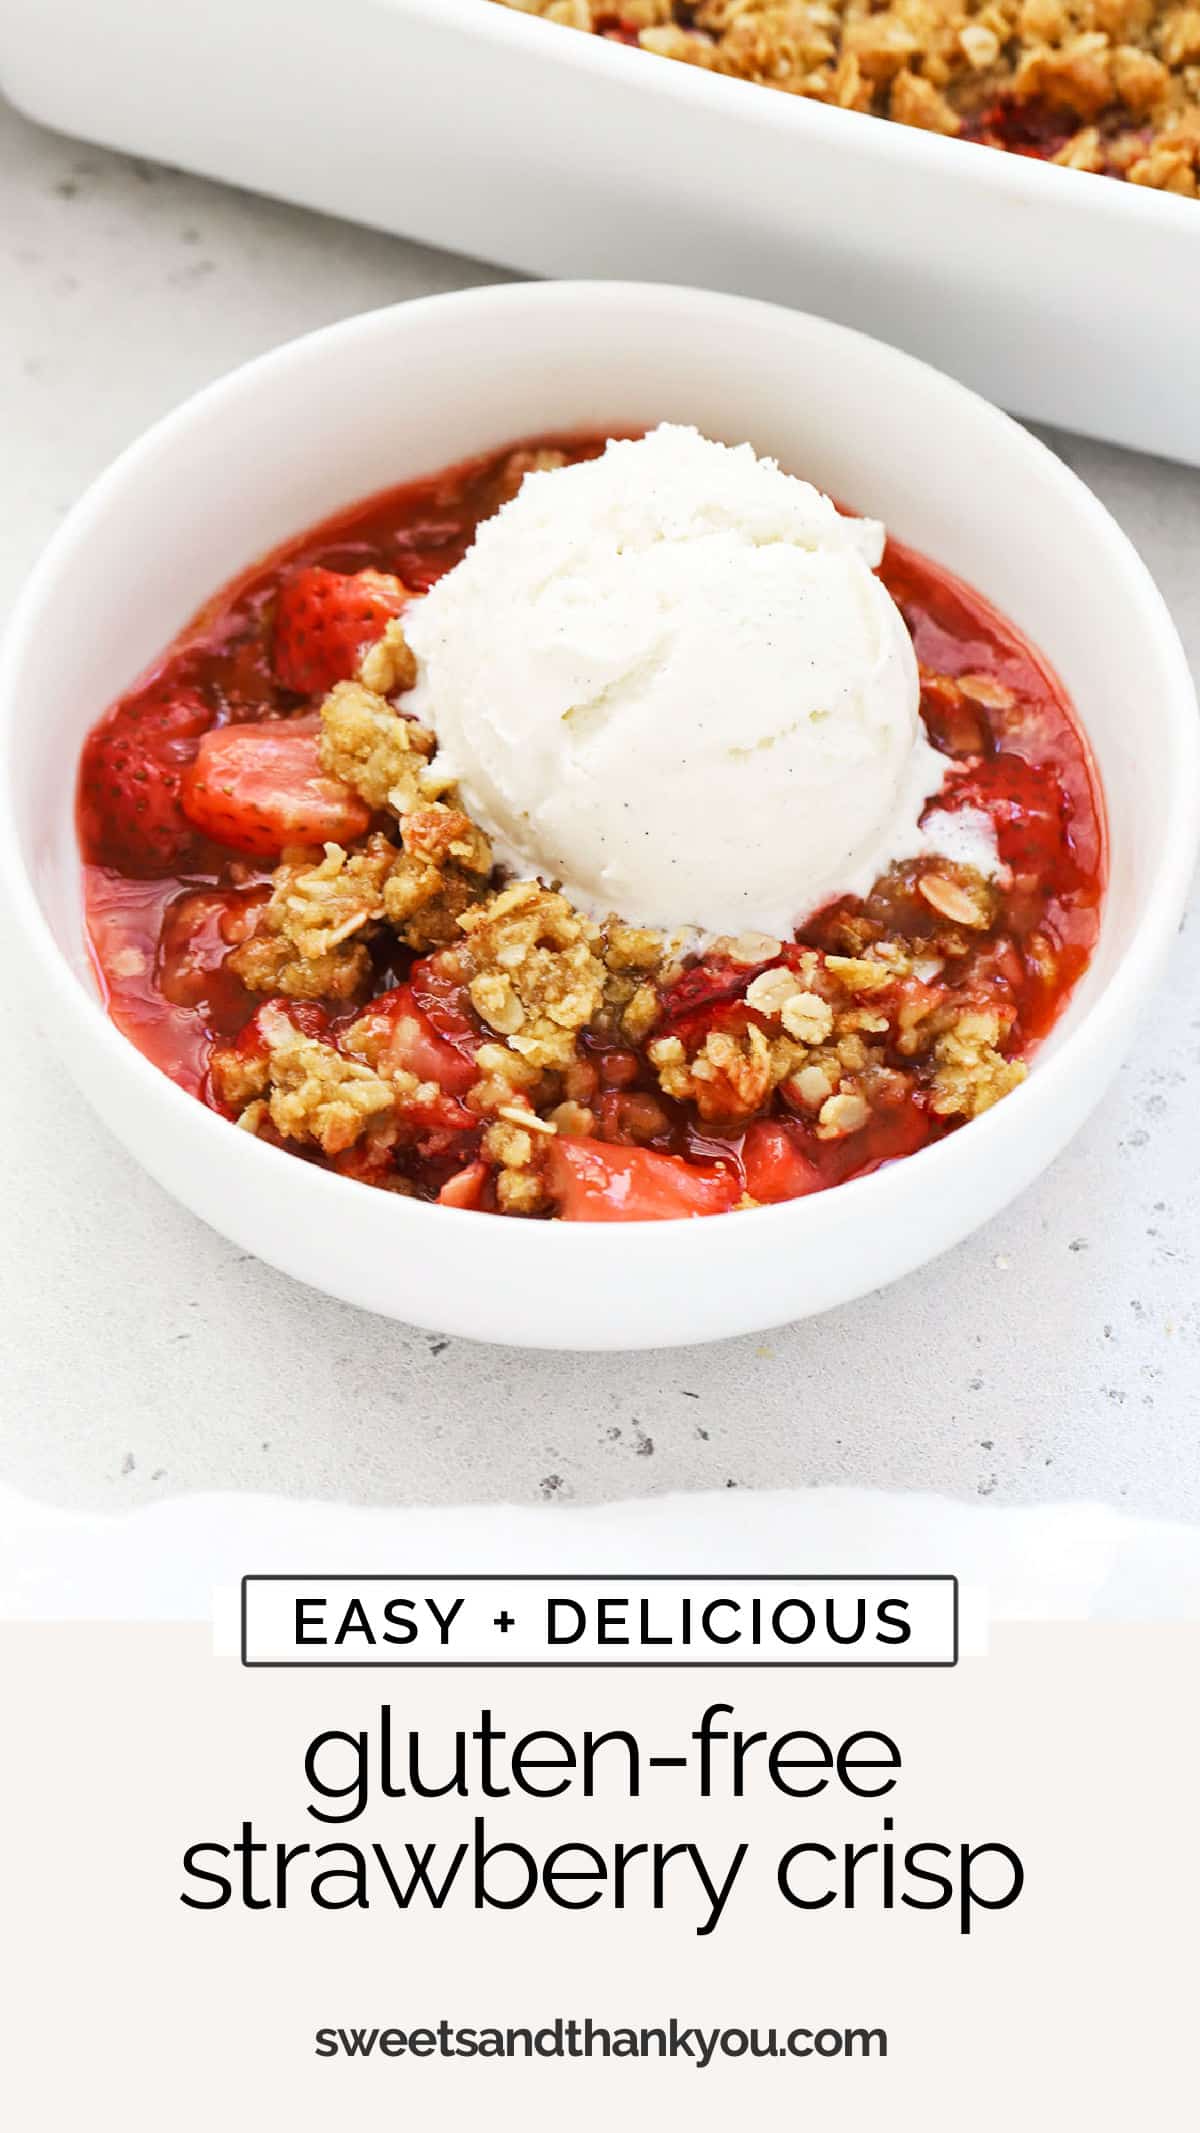 Strawberry season is the perfect time to make this easy gluten-free strawberry crisp recipe! Bursting with fresh berry flavor & finished with a simple oat crumble, it's summer's favorite dessert. / homemade gluten free strawberry crisp recipe / gluten free strawberry crumble recipe / gluten free strawberry crisp with oat topping / gluten free spring dessert / gluten free strawberry dessert / gluten free summer dessert / gluten free fruit crisp / gluten free fruit crumble